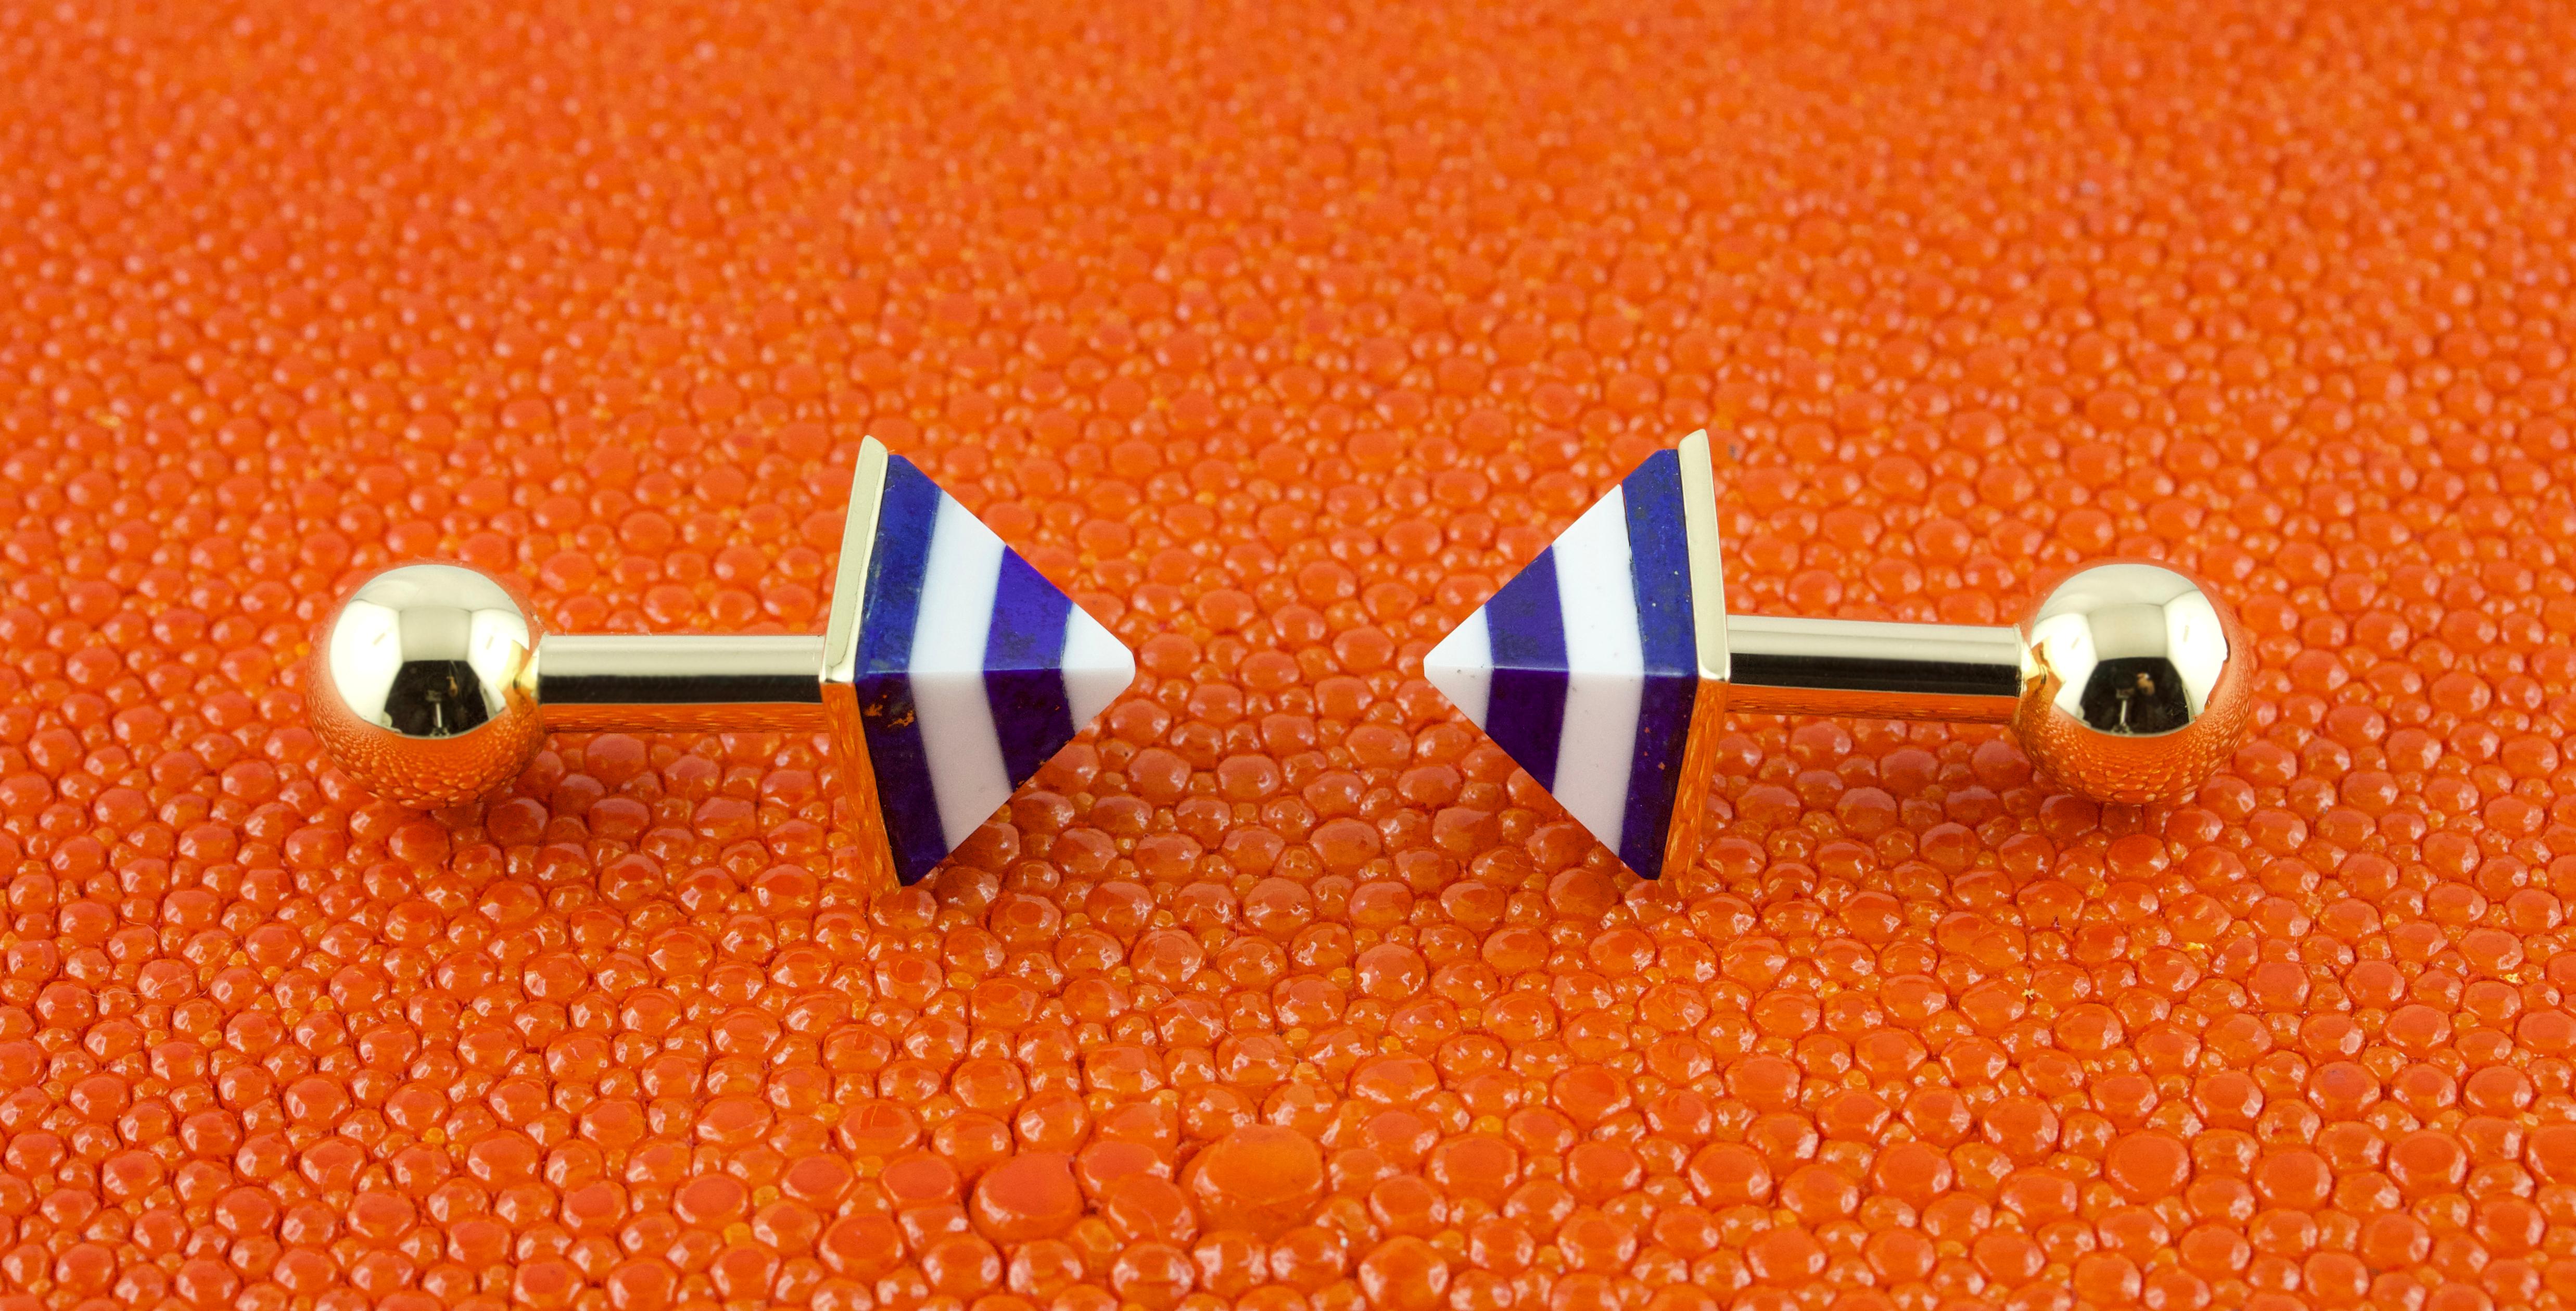 This superb pair of cufflinks feature a spherical toggle and minimalist post in 18k yellow gold, while the front face is in the shape of a pyramid mounted in pure gold and featuring layers of white agate and lapis lazuli alternating for a timeless